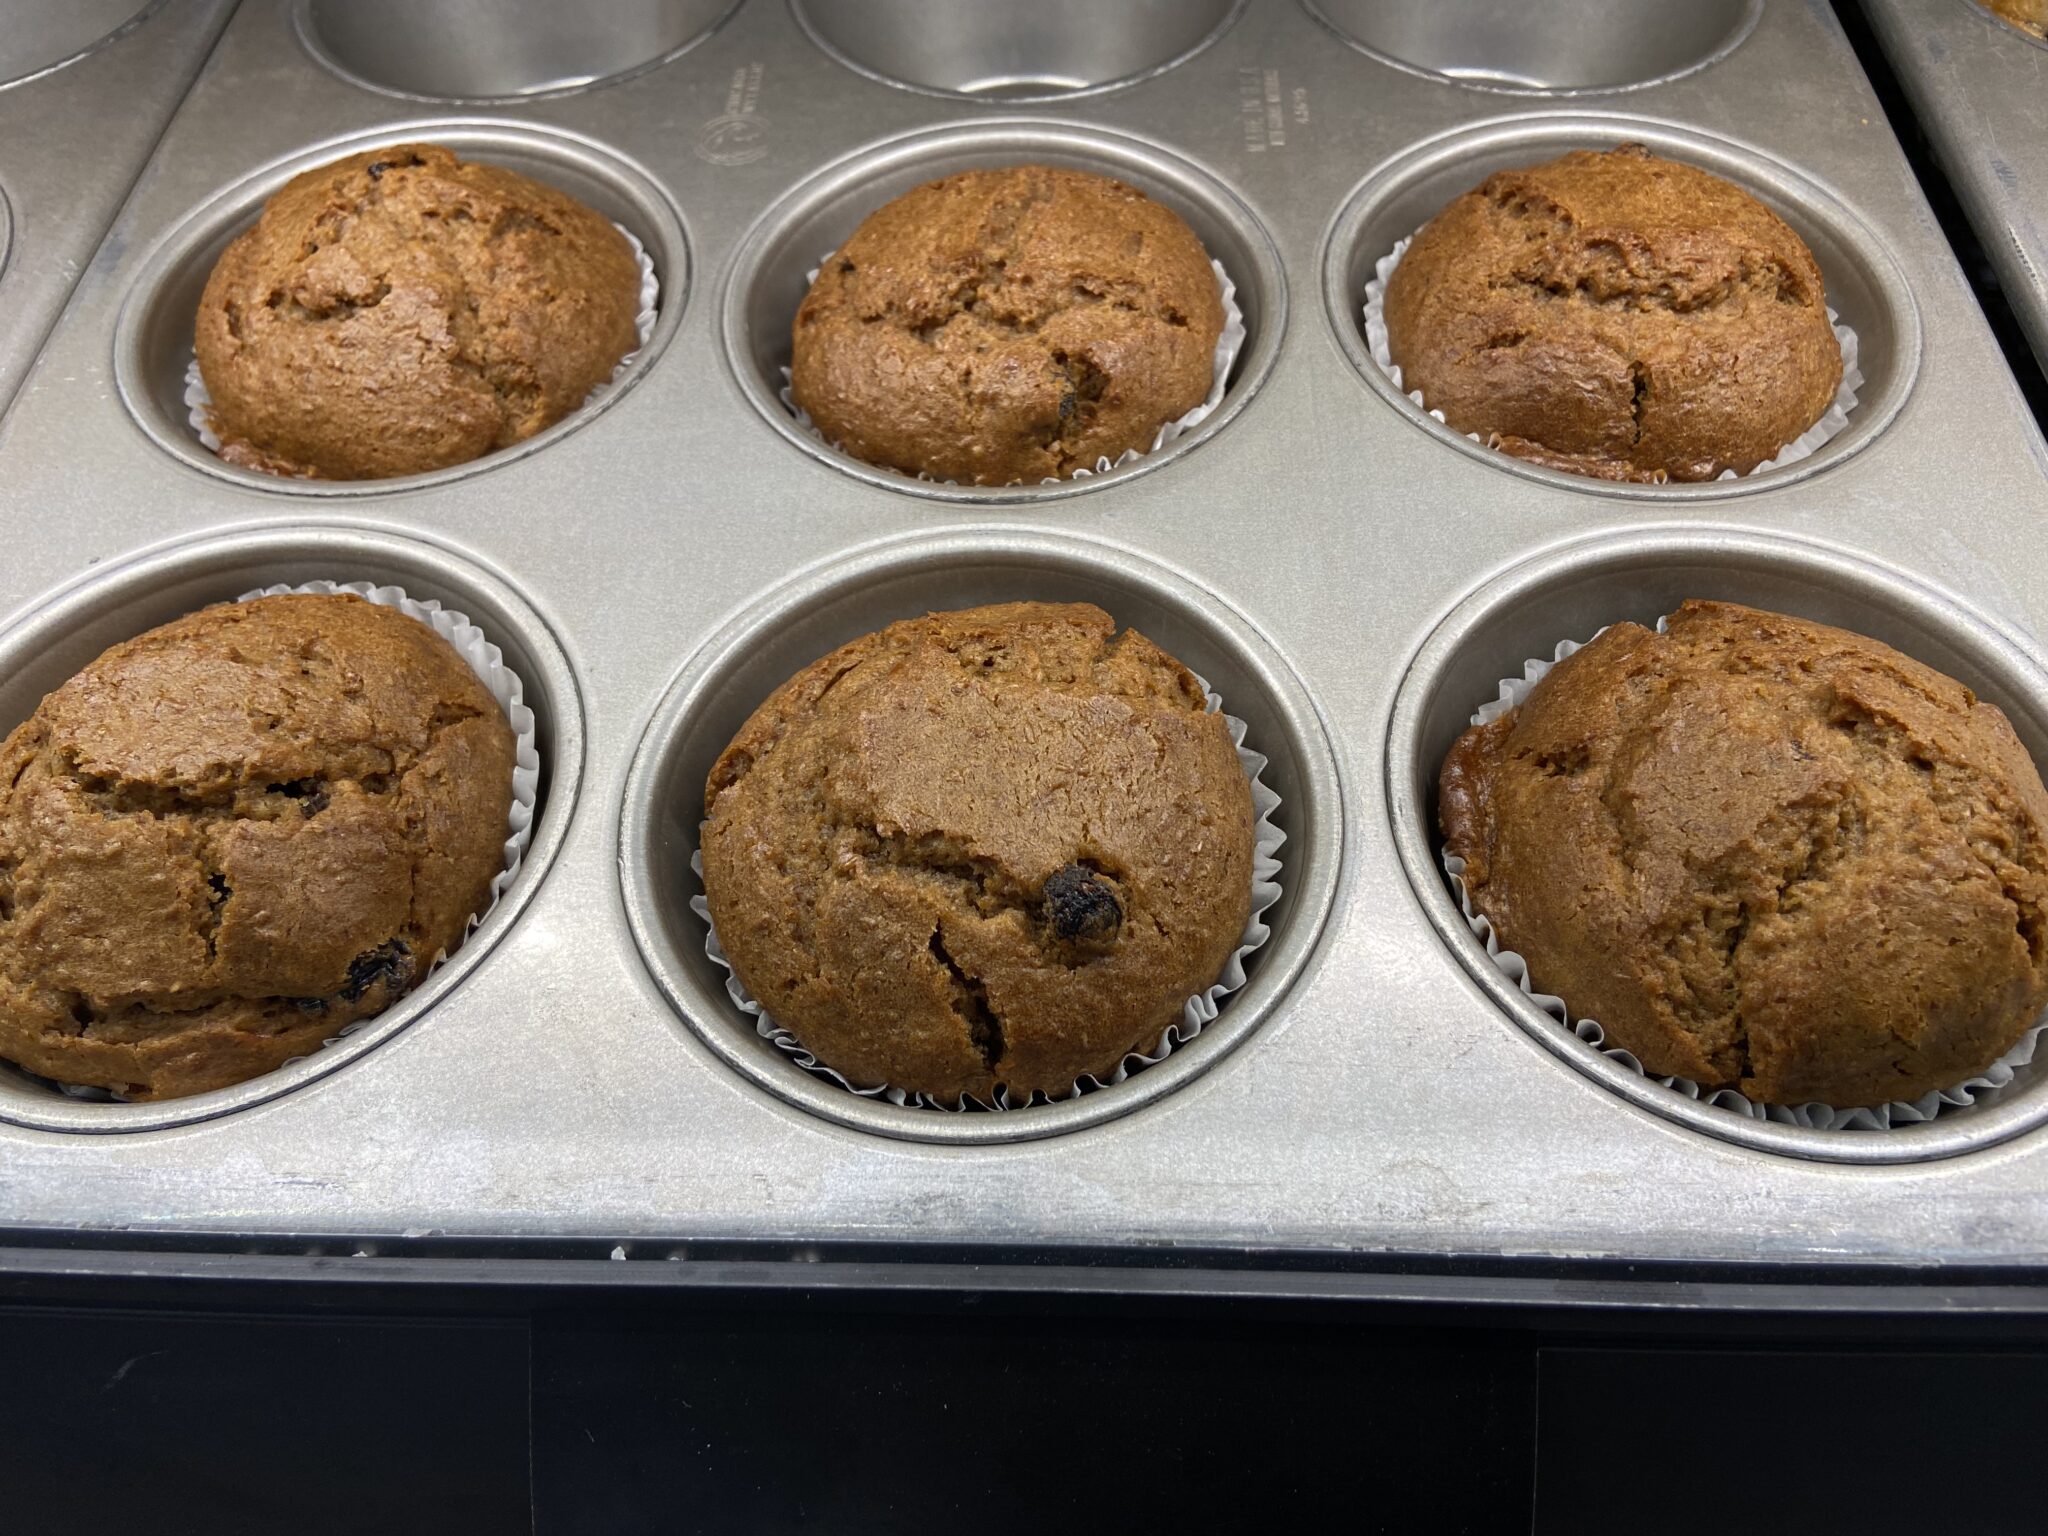 Giant: Pick Your Own Muffin For JUST $0.99 2/20 ONLY!